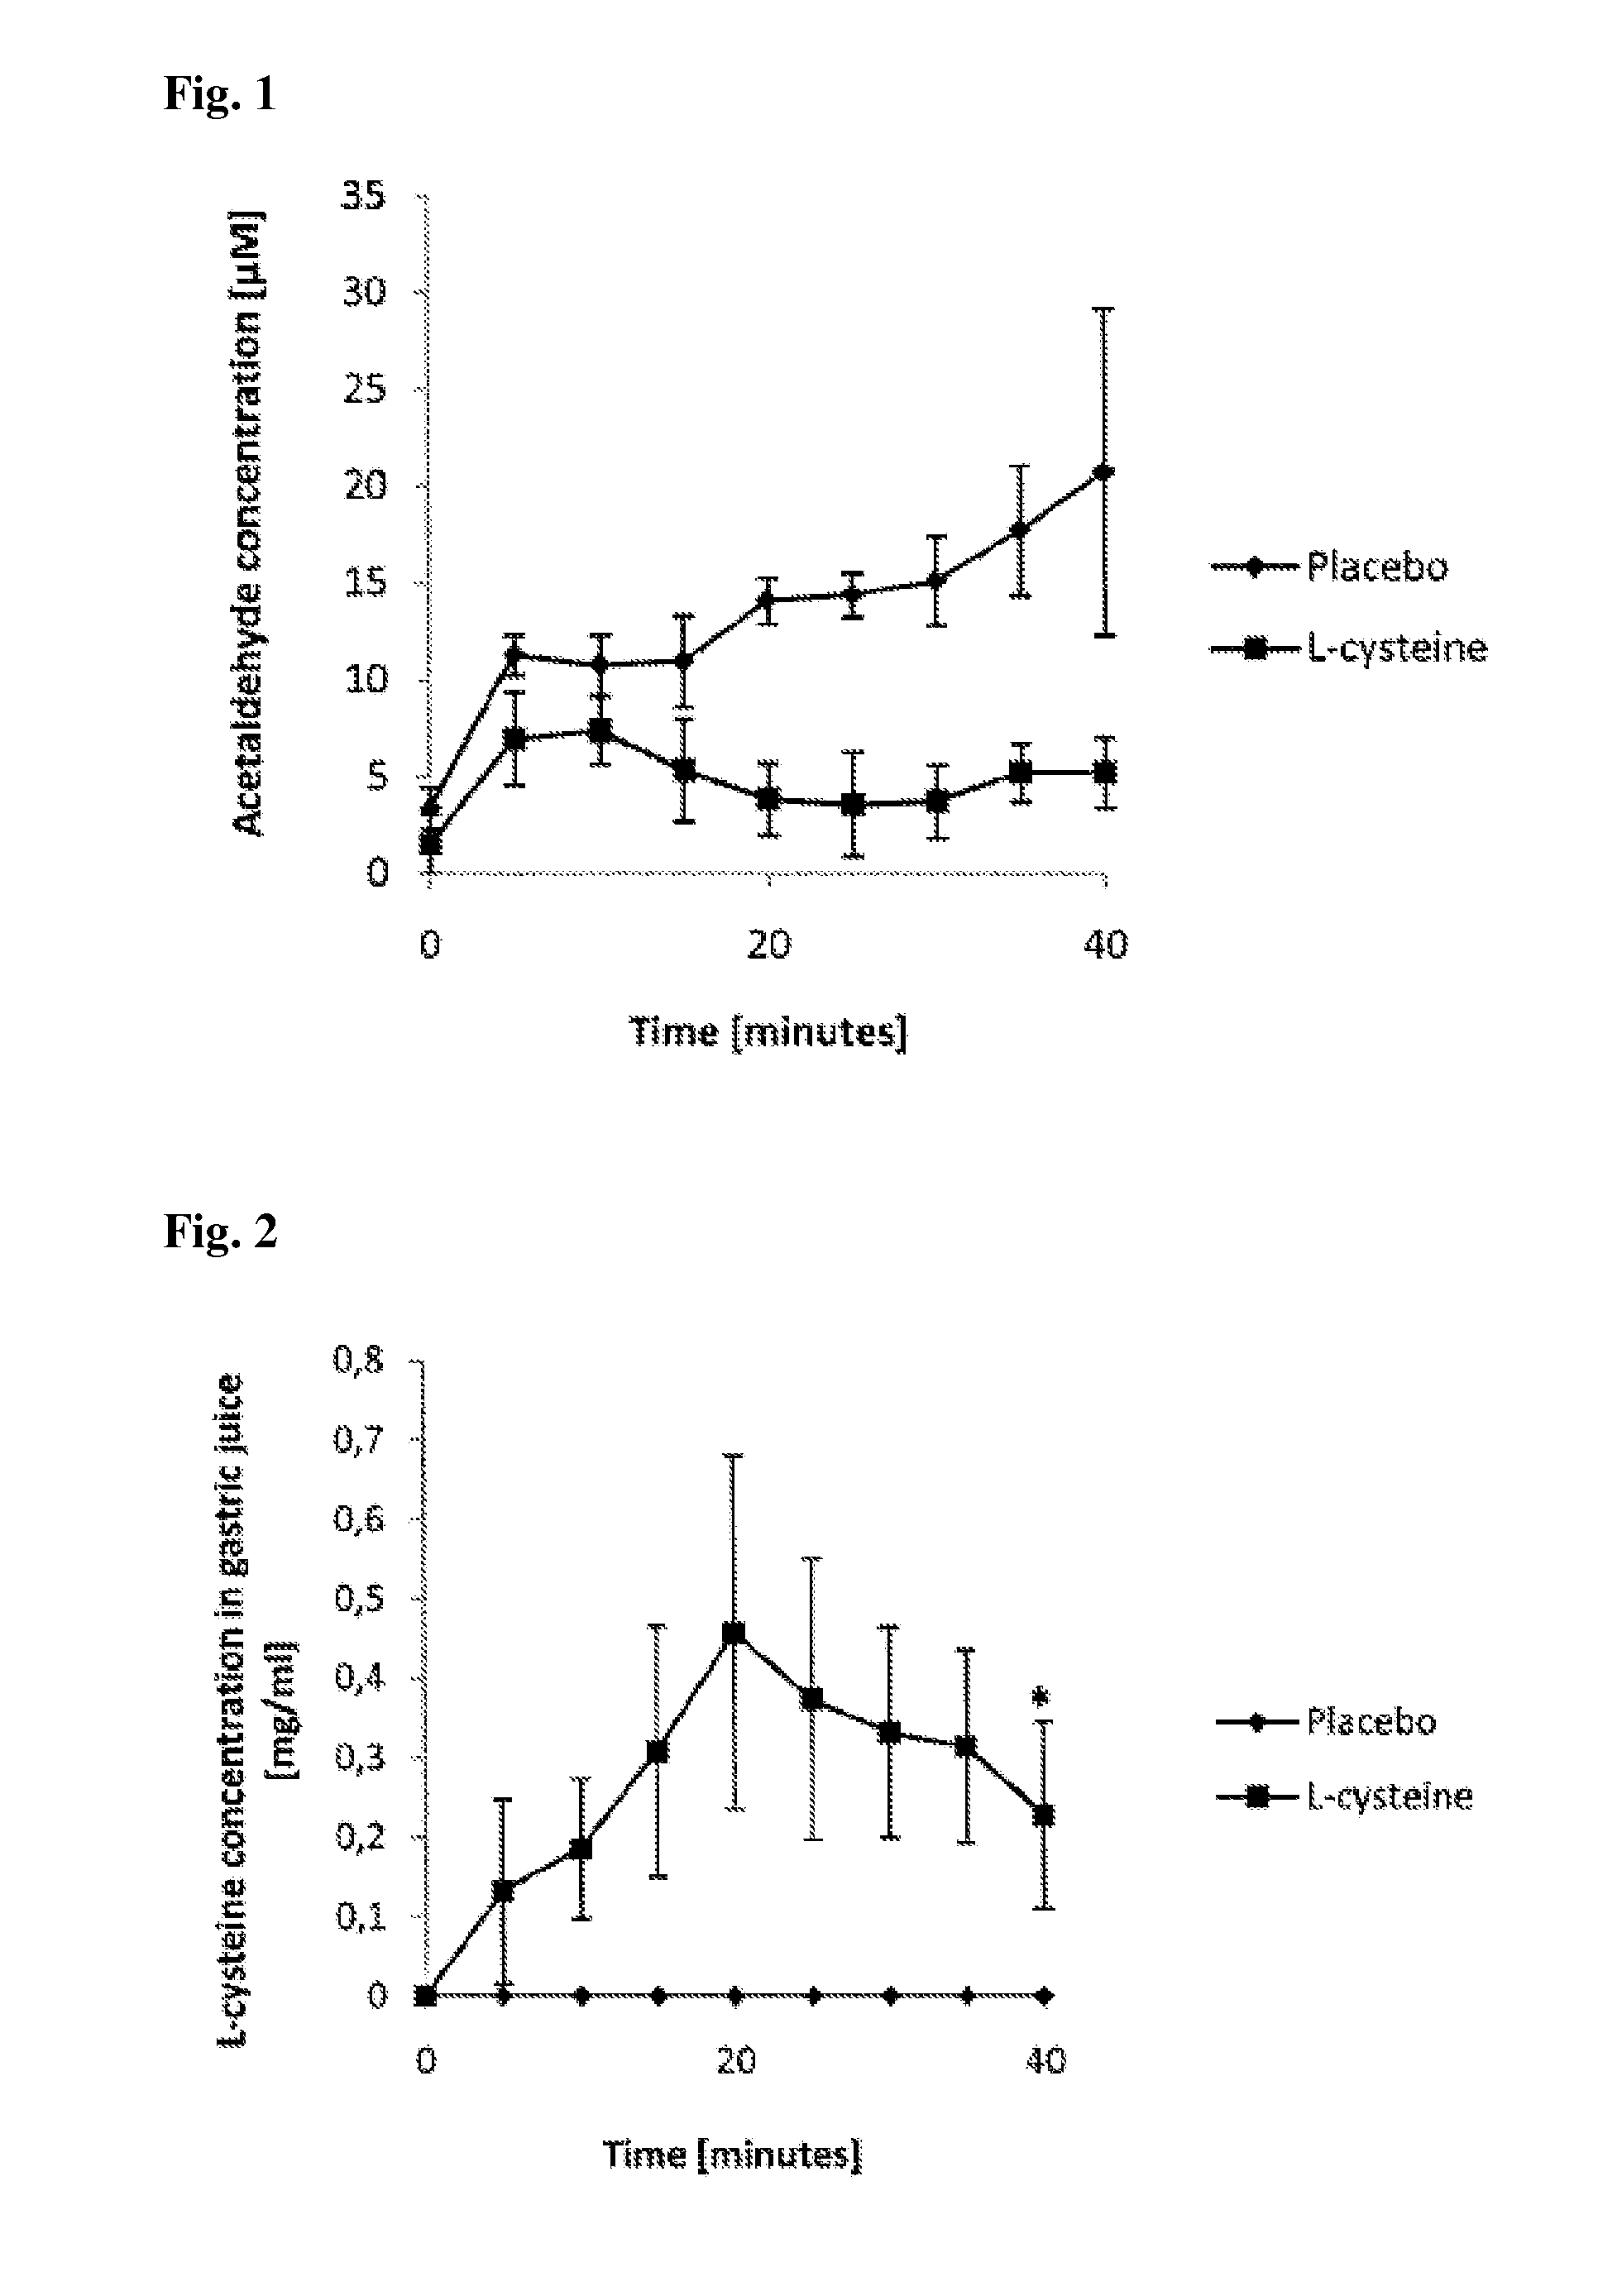 Composition for oral administration for binding aldehydes in the gastrointestinal tract